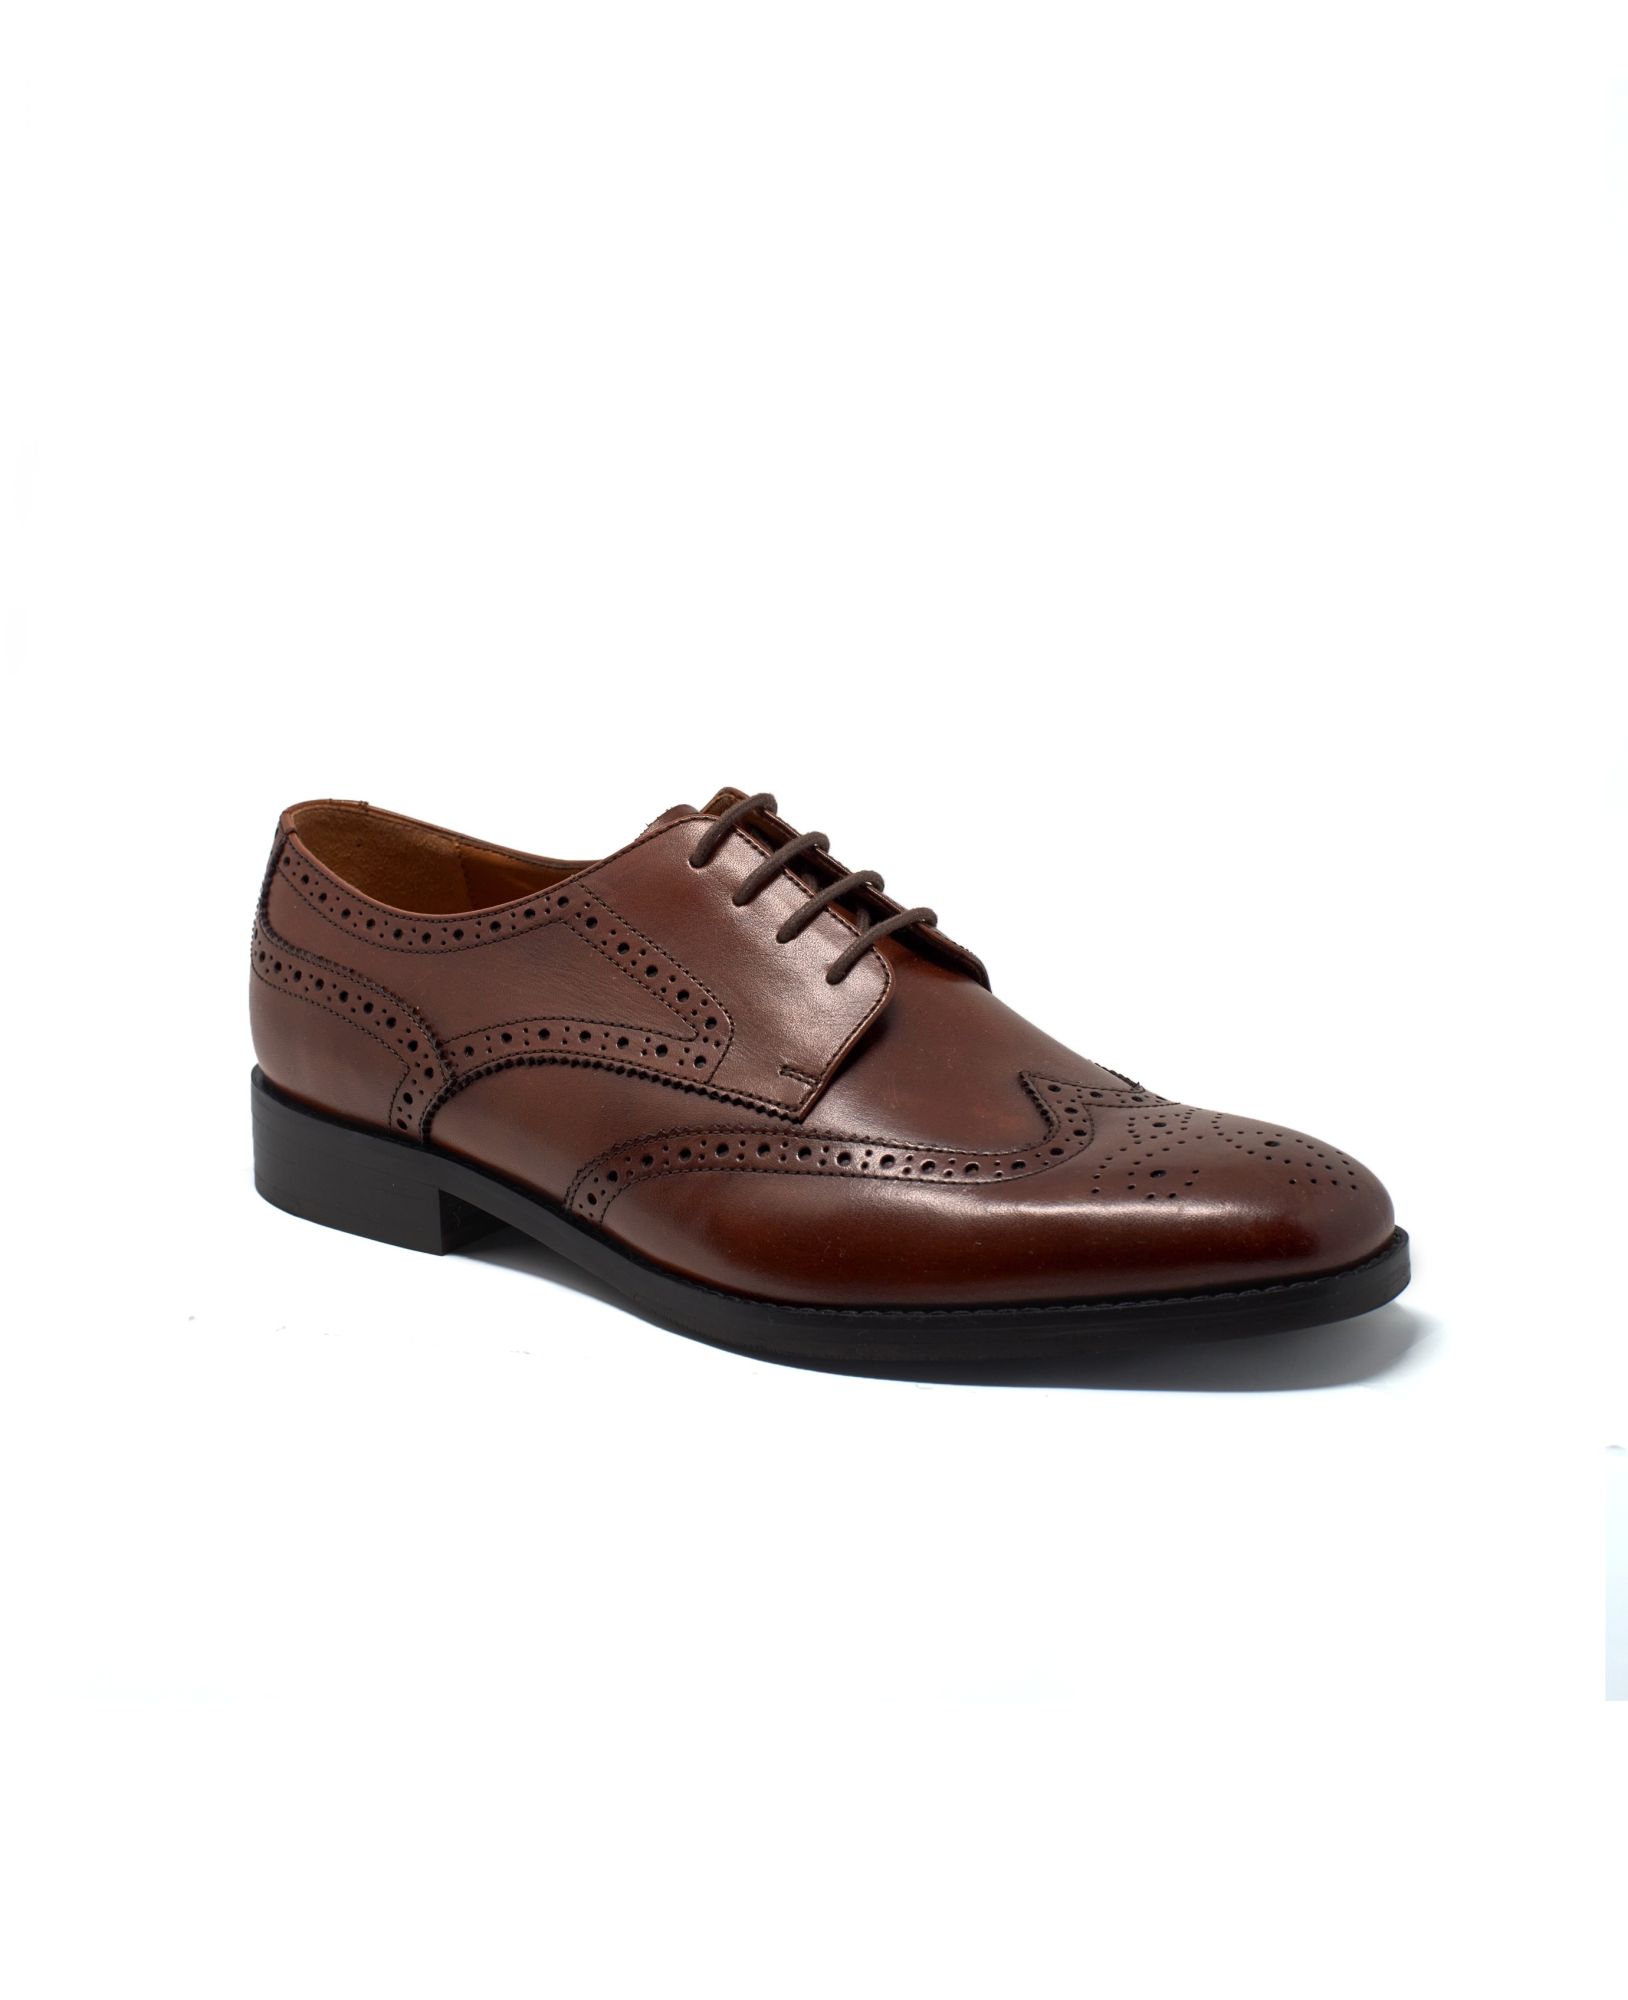 Chocolate Brown Leather Derby Shoes With Brogue Detailing 8